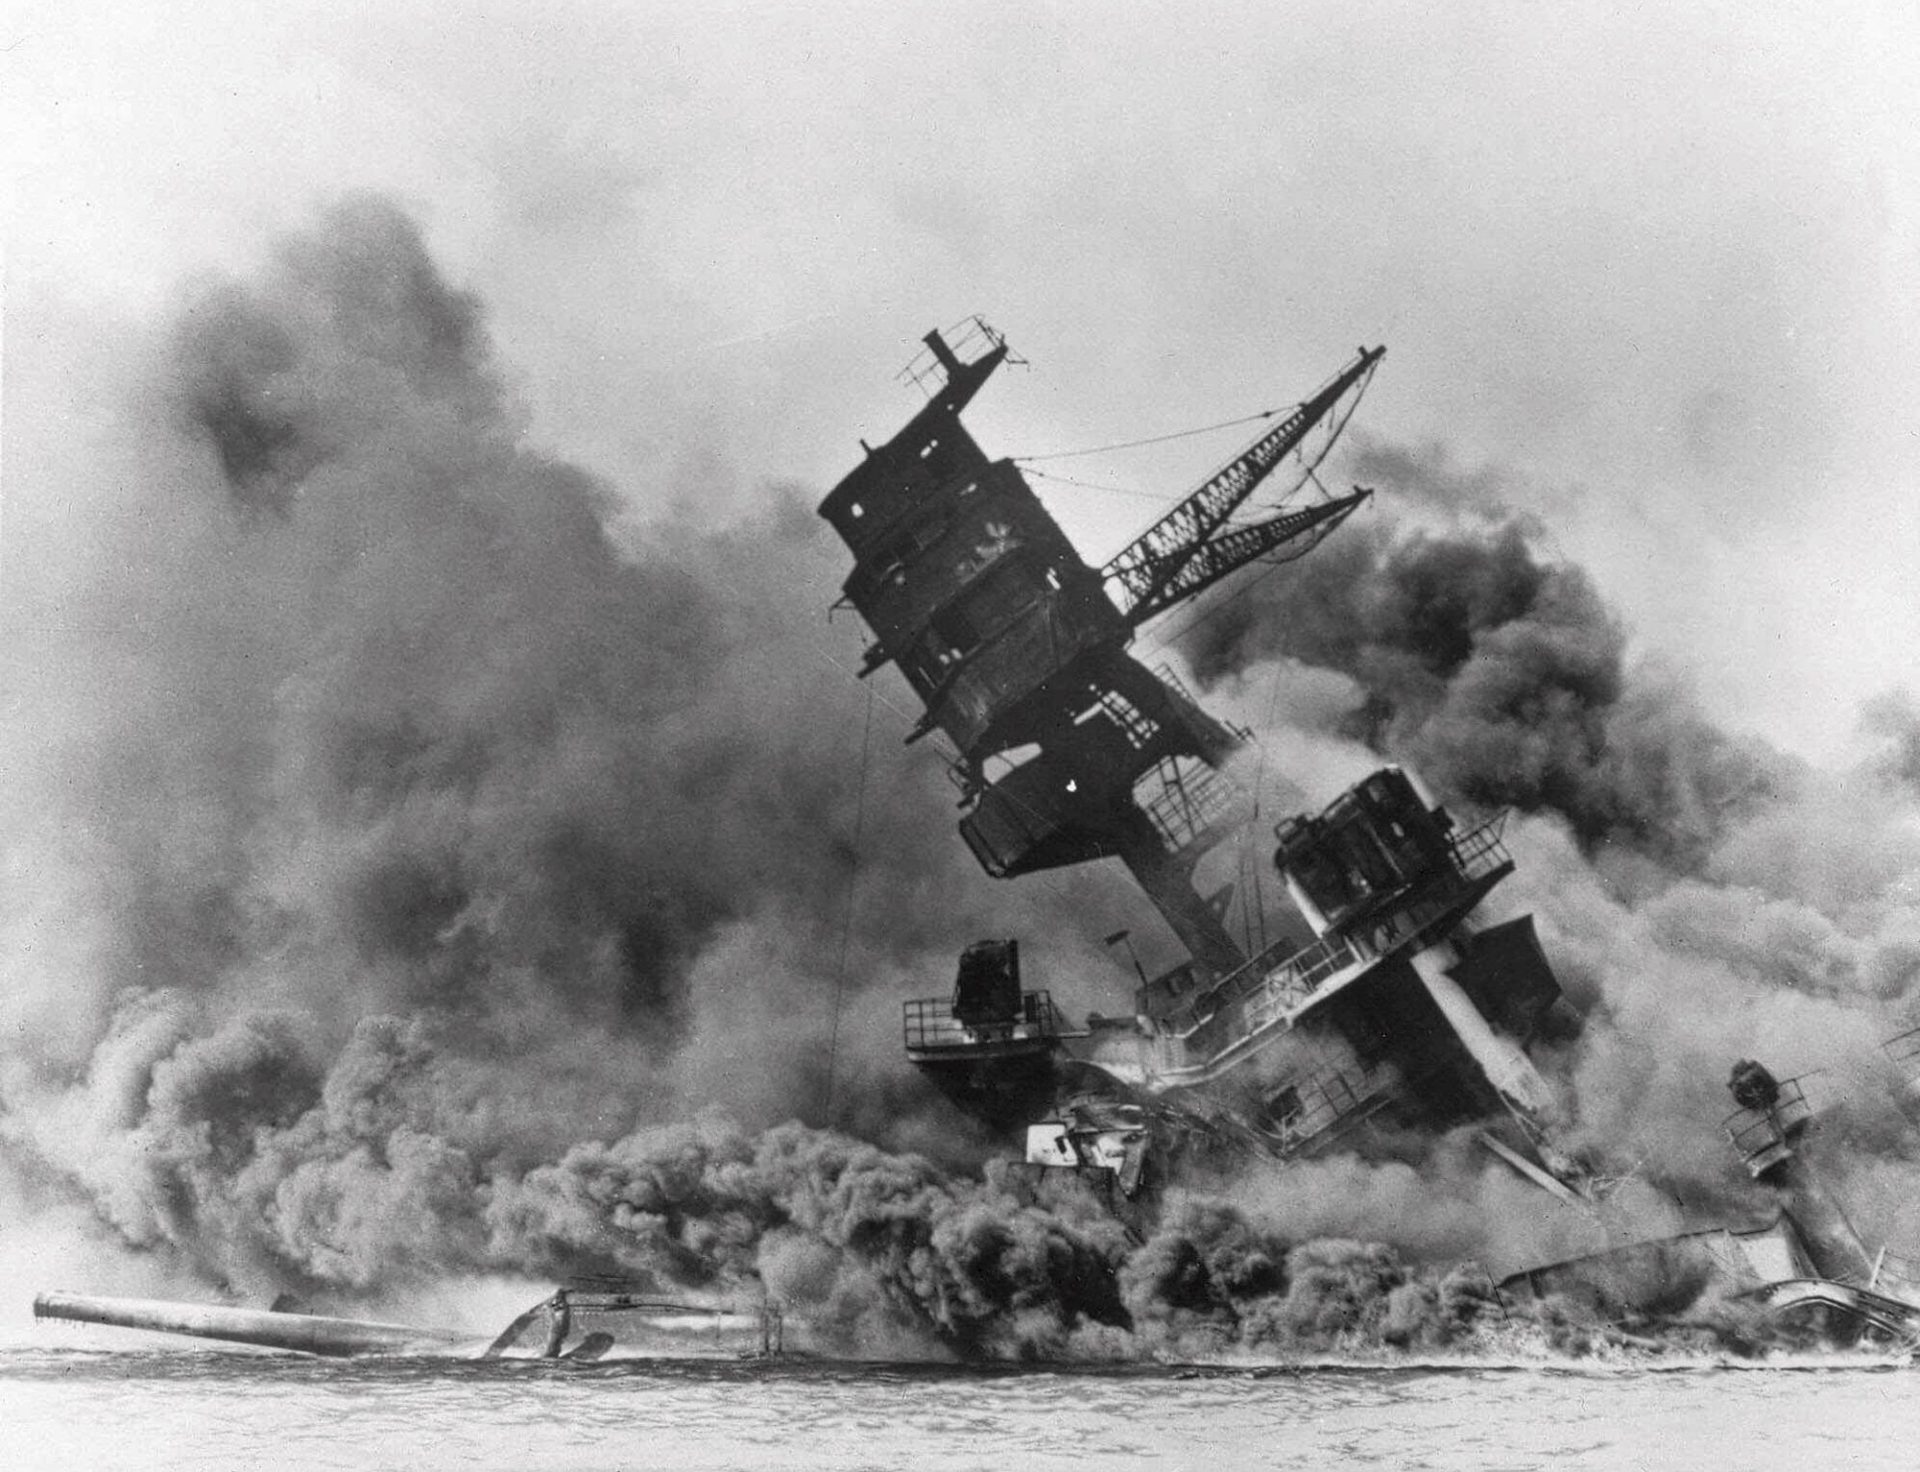 In this Dec. 7, 1941, file photo, smoke rises from the battleship USS Arizona as it sinks during a Japanese surprise attack on Pearl Harbor, Hawaii.